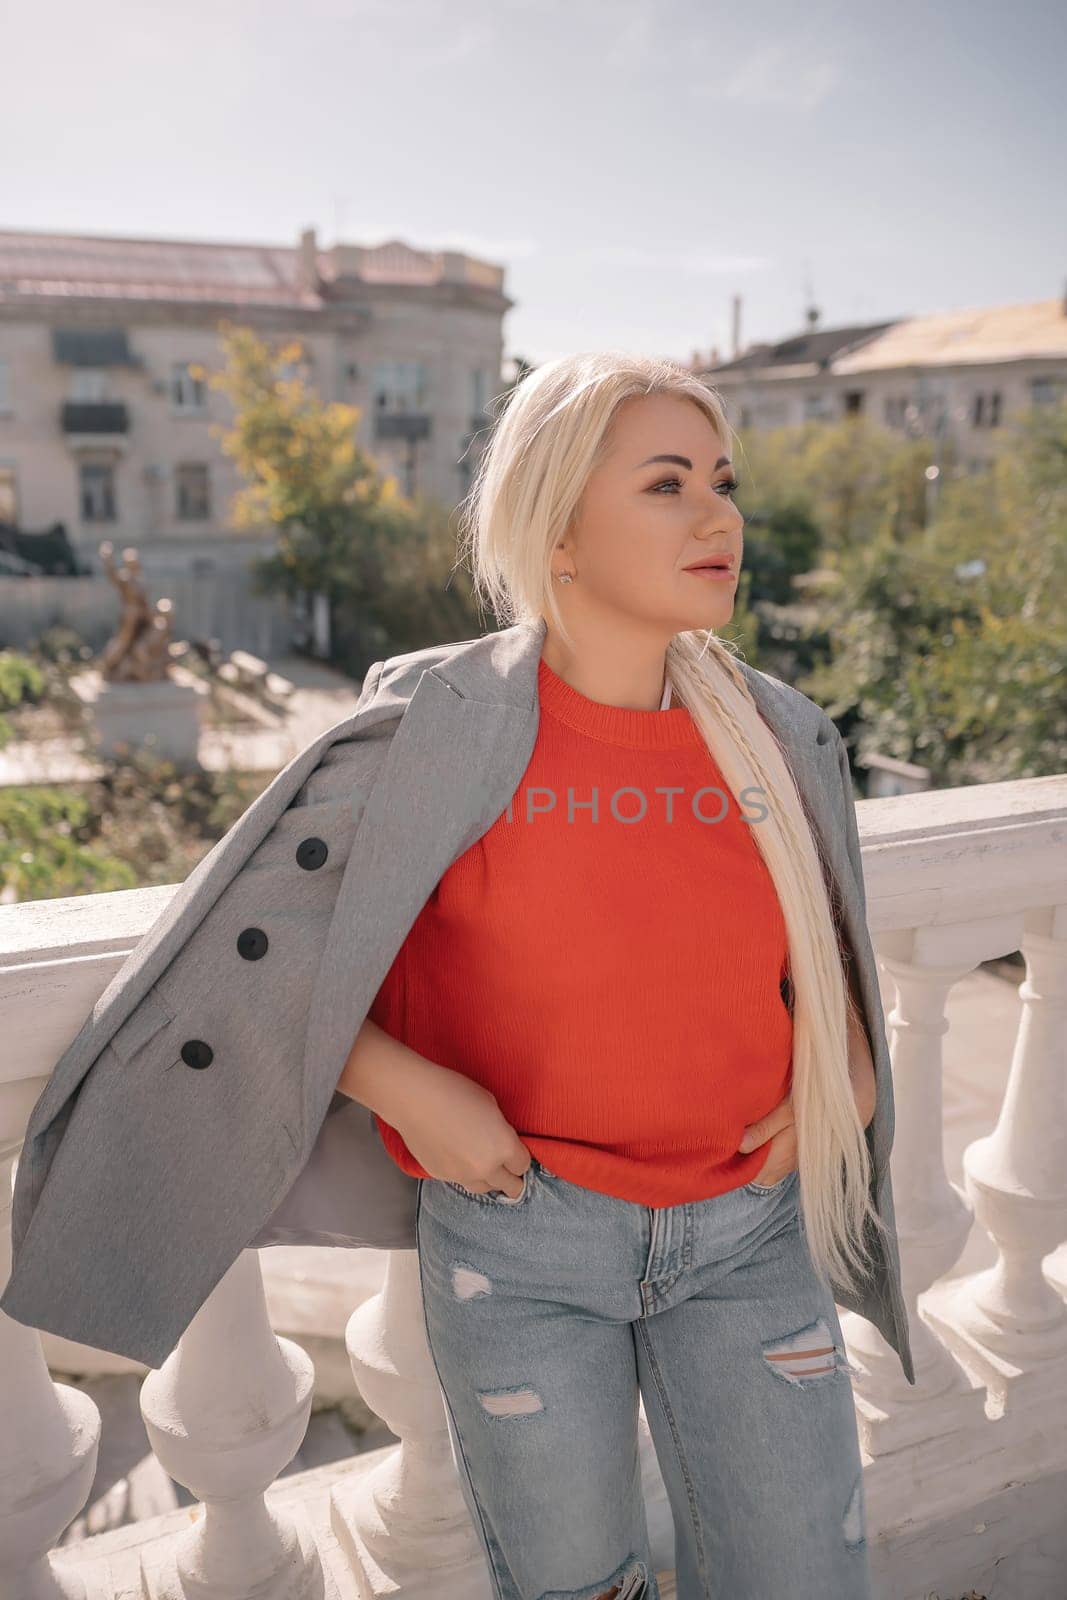 A blonde woman wearing a red shirt and gray jacket stands on a balcony. She is wearing ripped jeans and has her hands in her pockets. by Matiunina